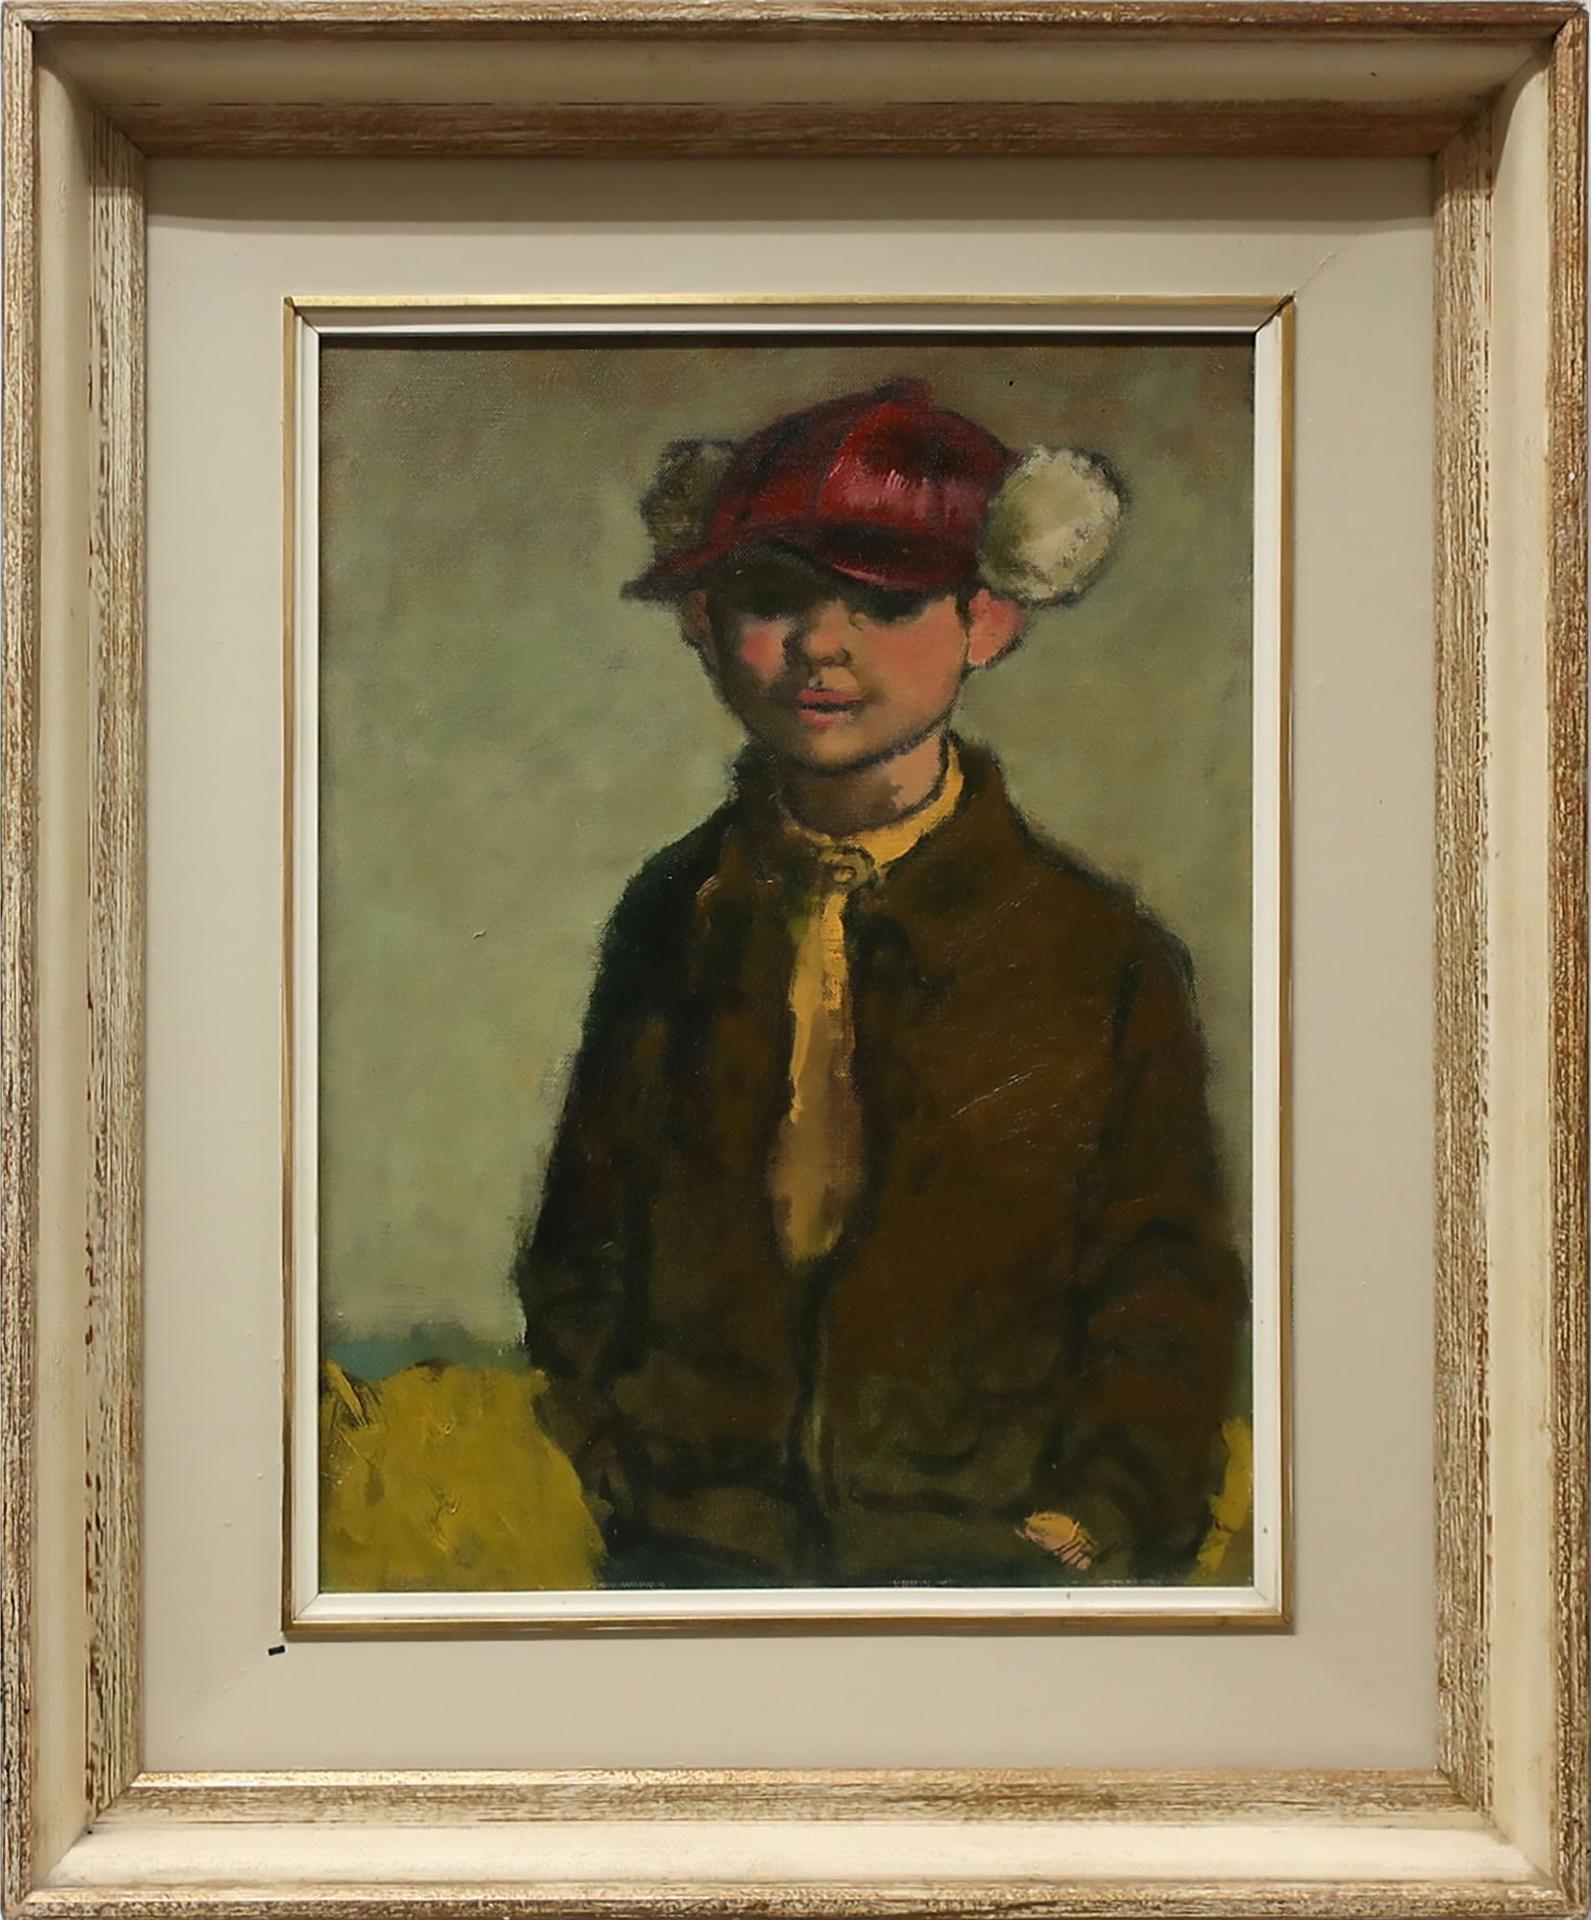 William Arthur Winter (1909-1996) - Untitled (Boy With Red Cap)